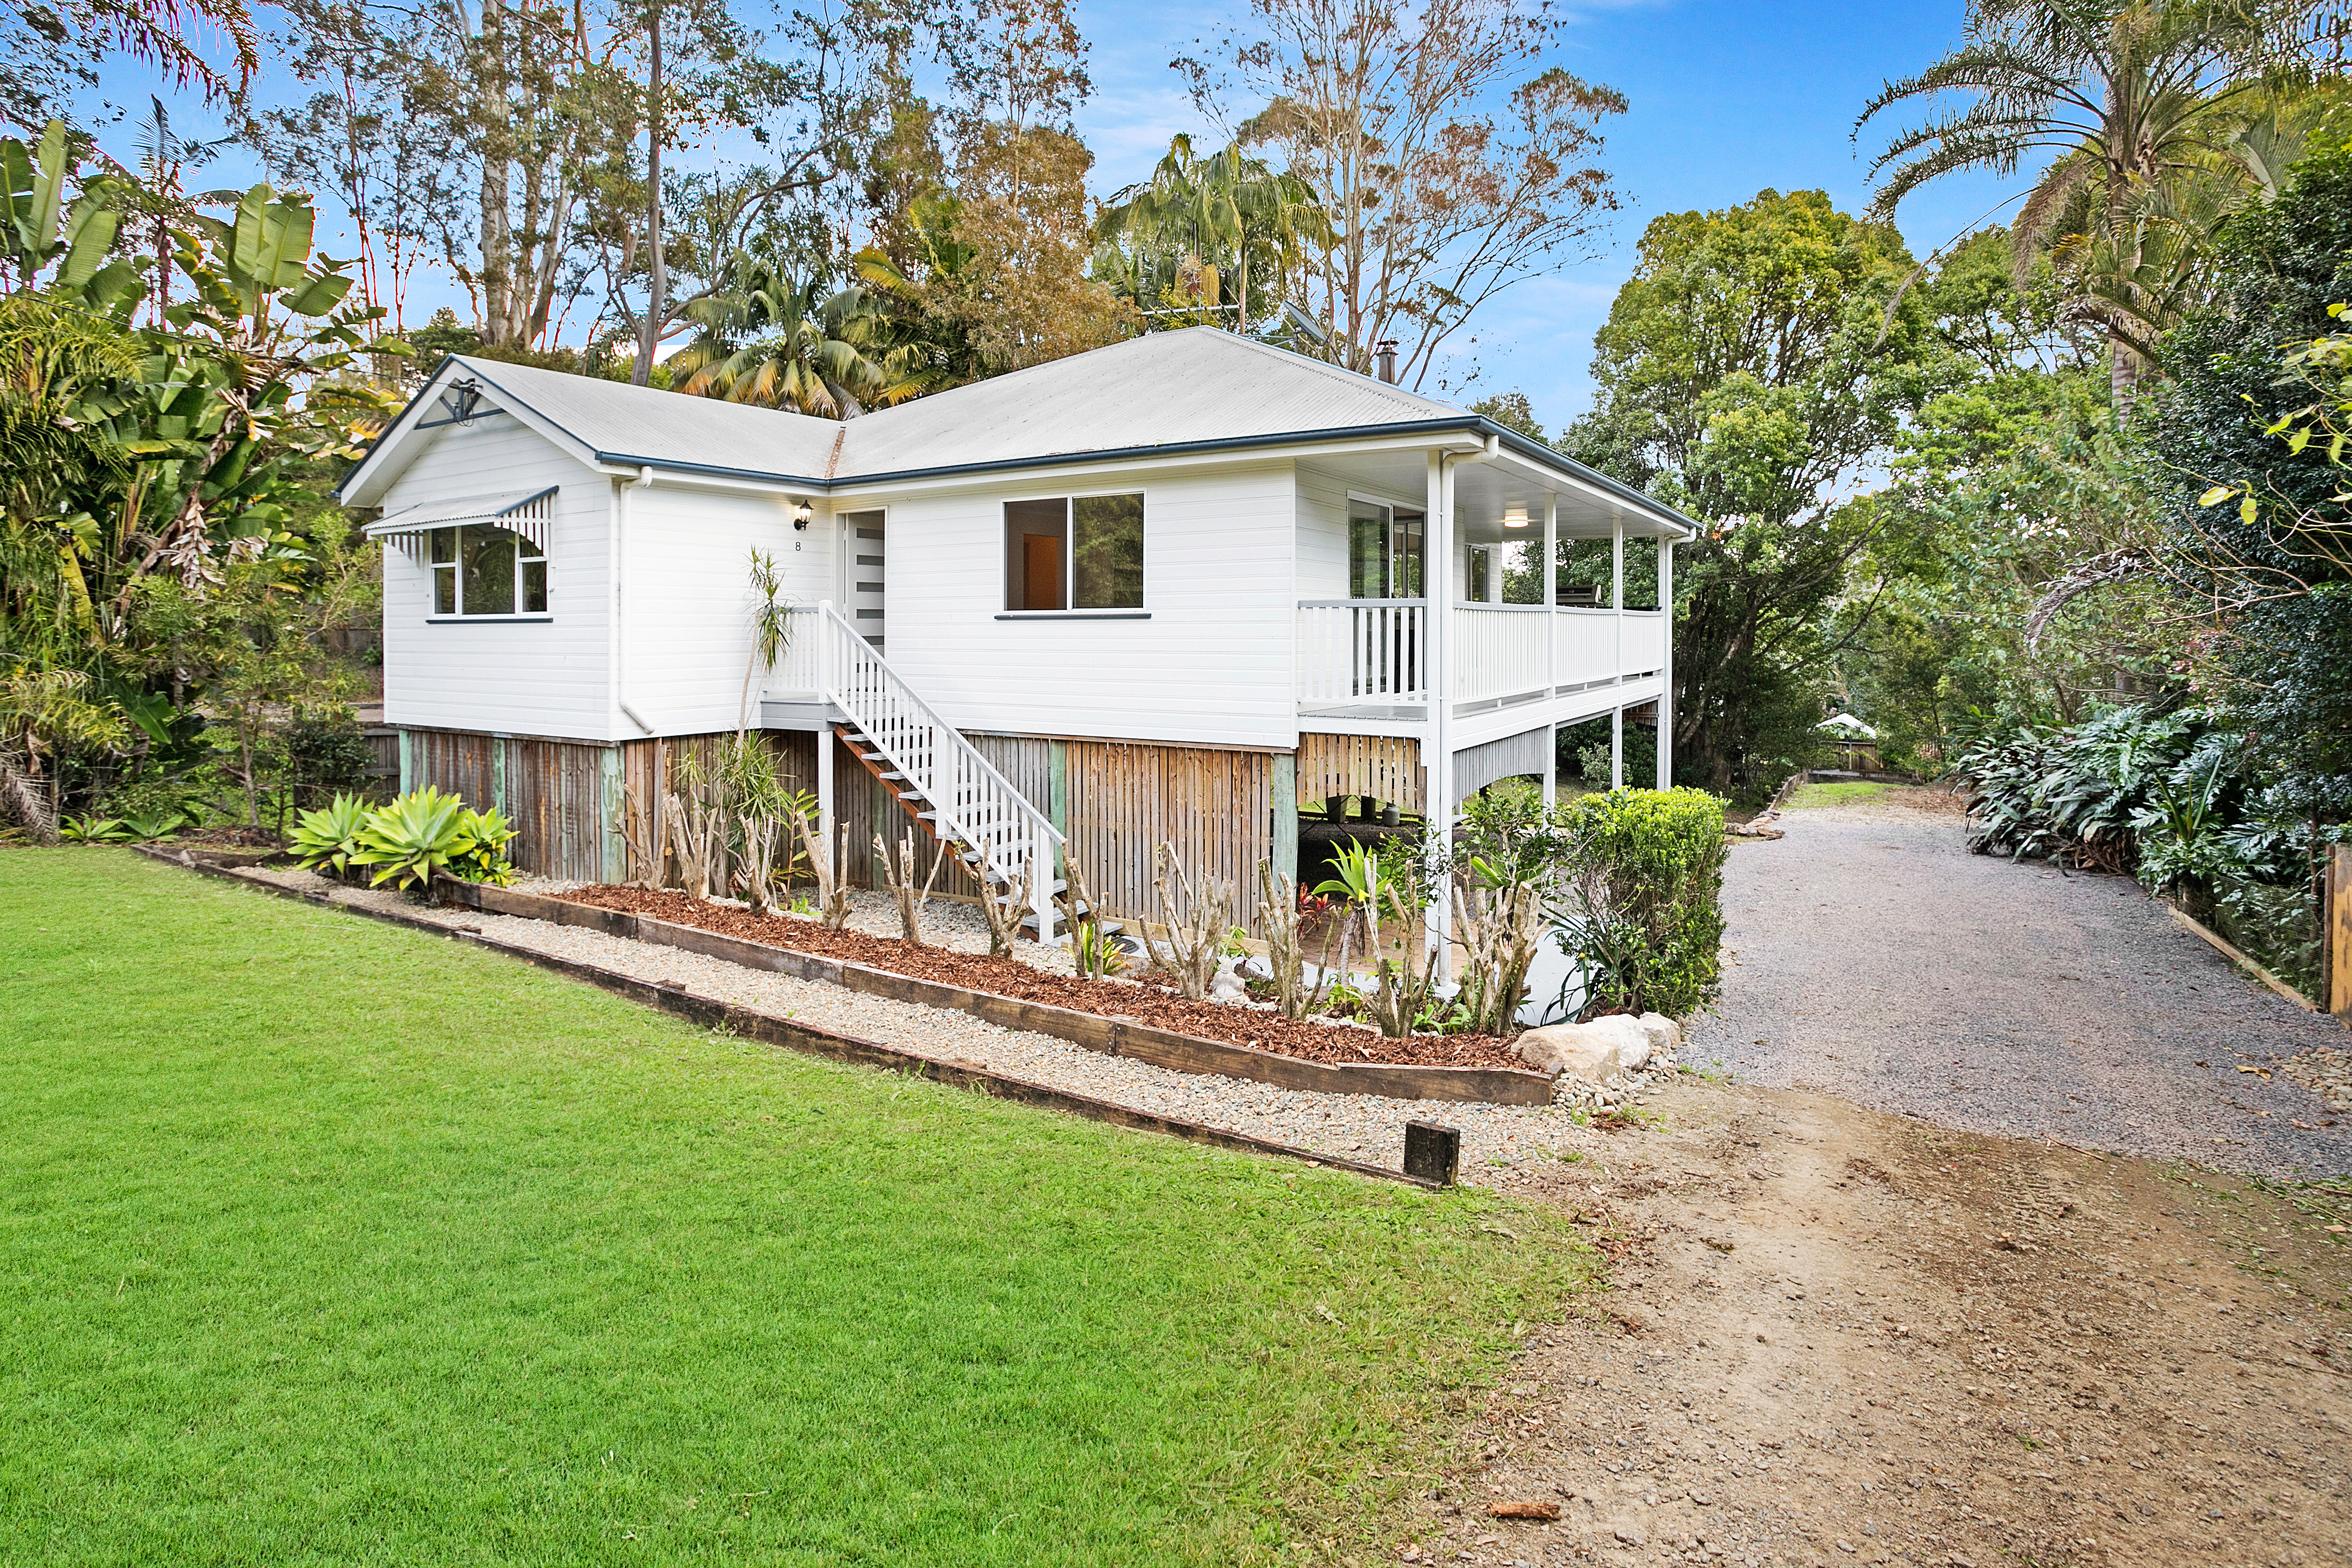 Property in Maleny - Sold for $765,000